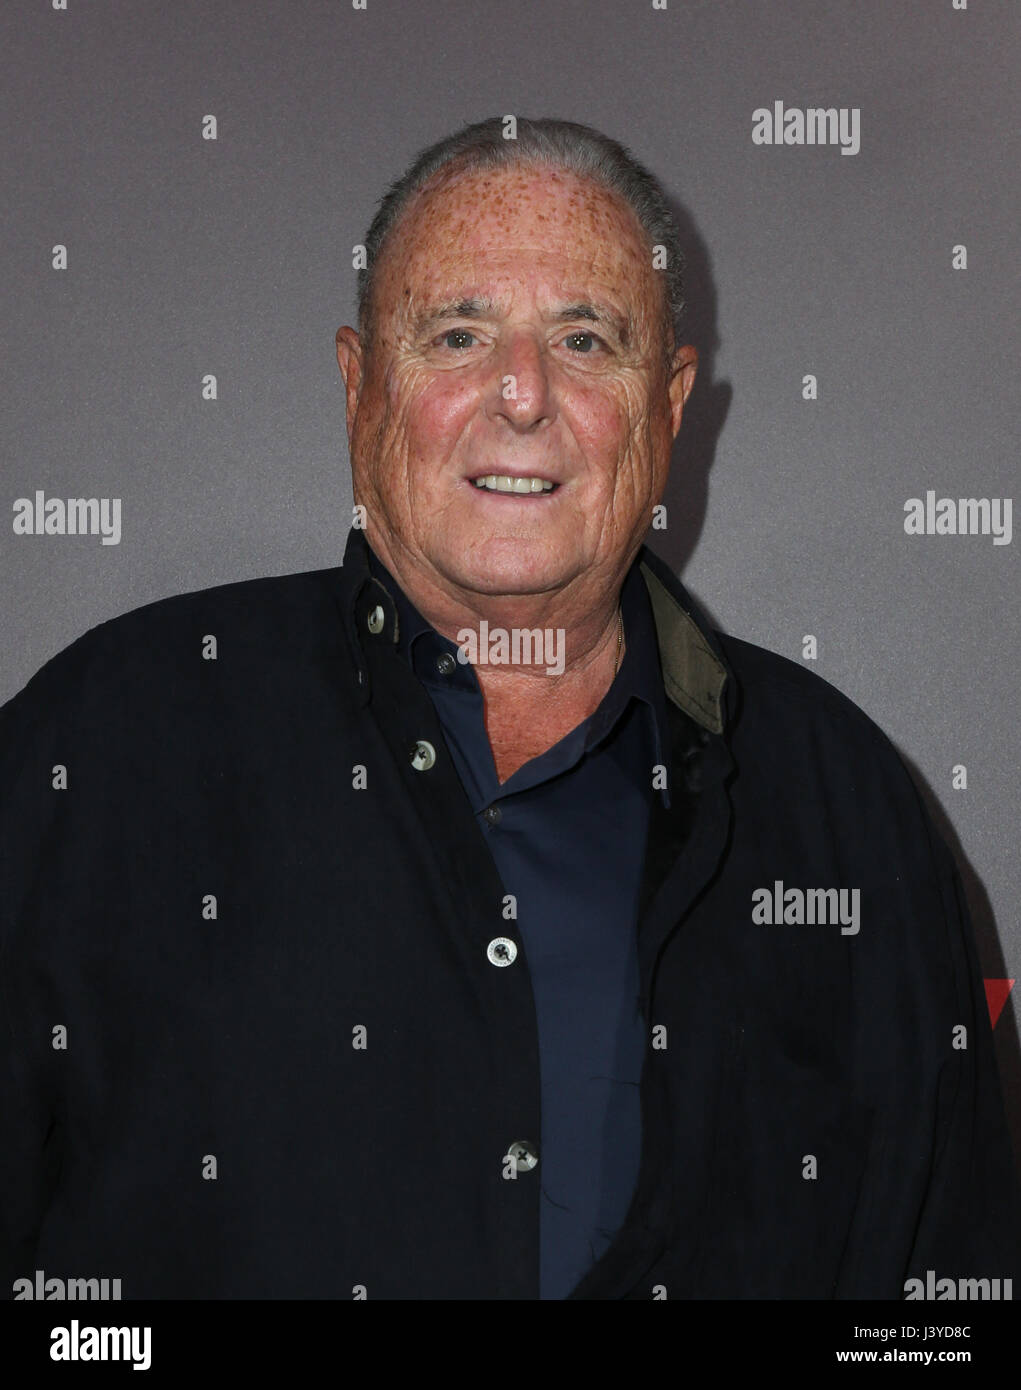 Premiere of Netflix's 'Sandy Wexler' - Arrivals  Featuring: Sandy Wernick Where: Hollywood, California, United States When: 06 Apr 2017 Credit: FayesVision/WENN.com Stock Photo